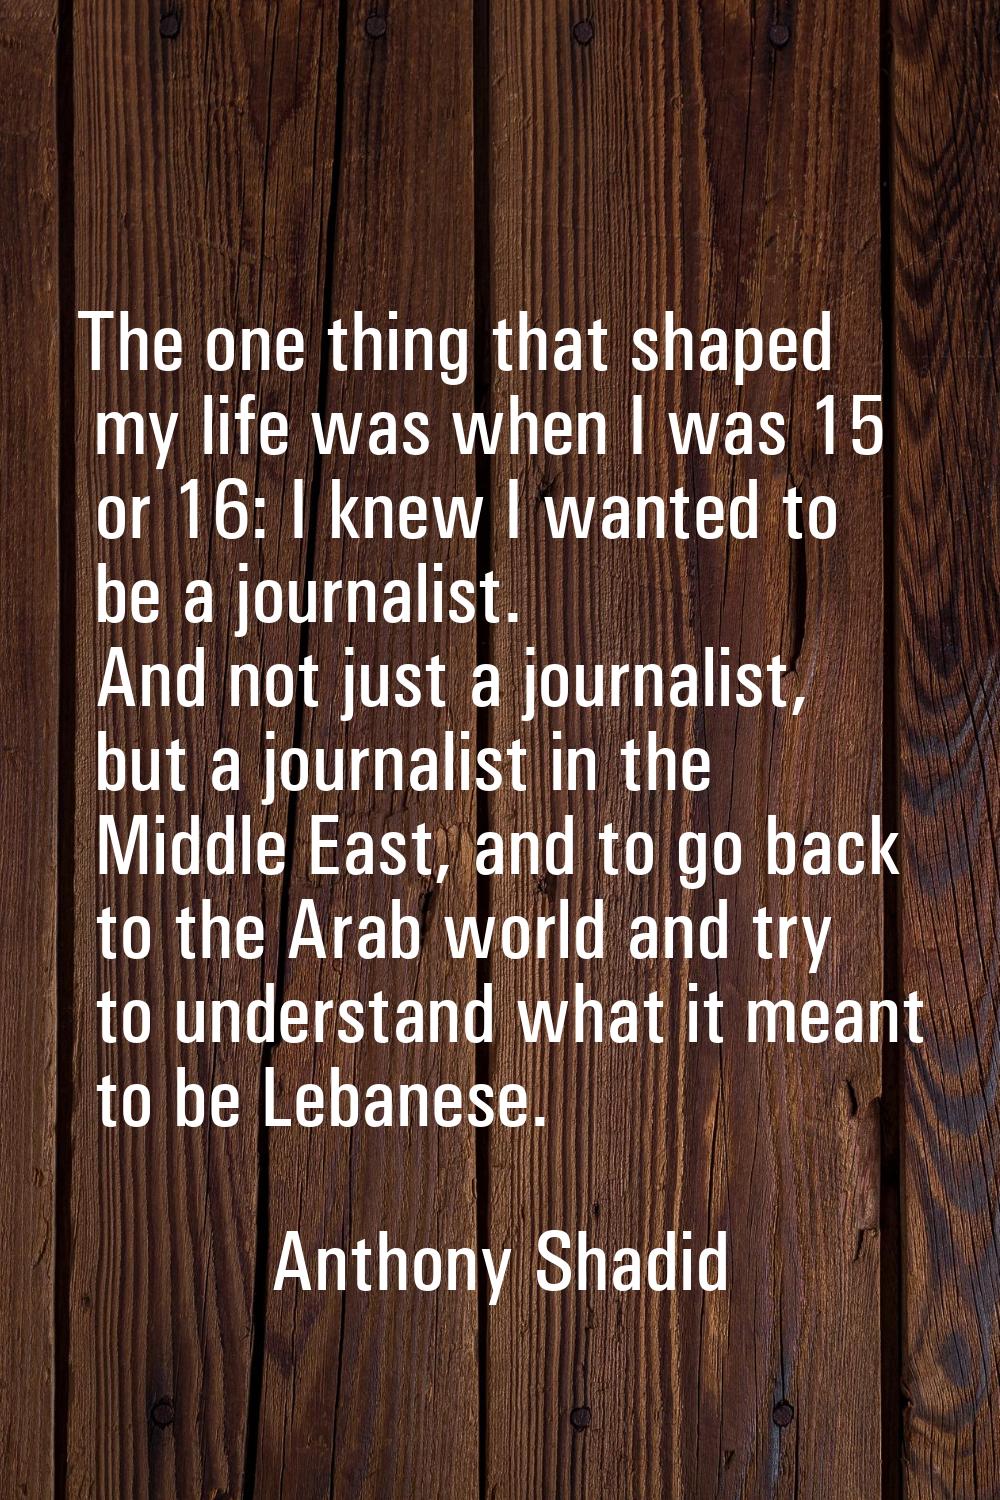 The one thing that shaped my life was when I was 15 or 16: I knew I wanted to be a journalist. And 